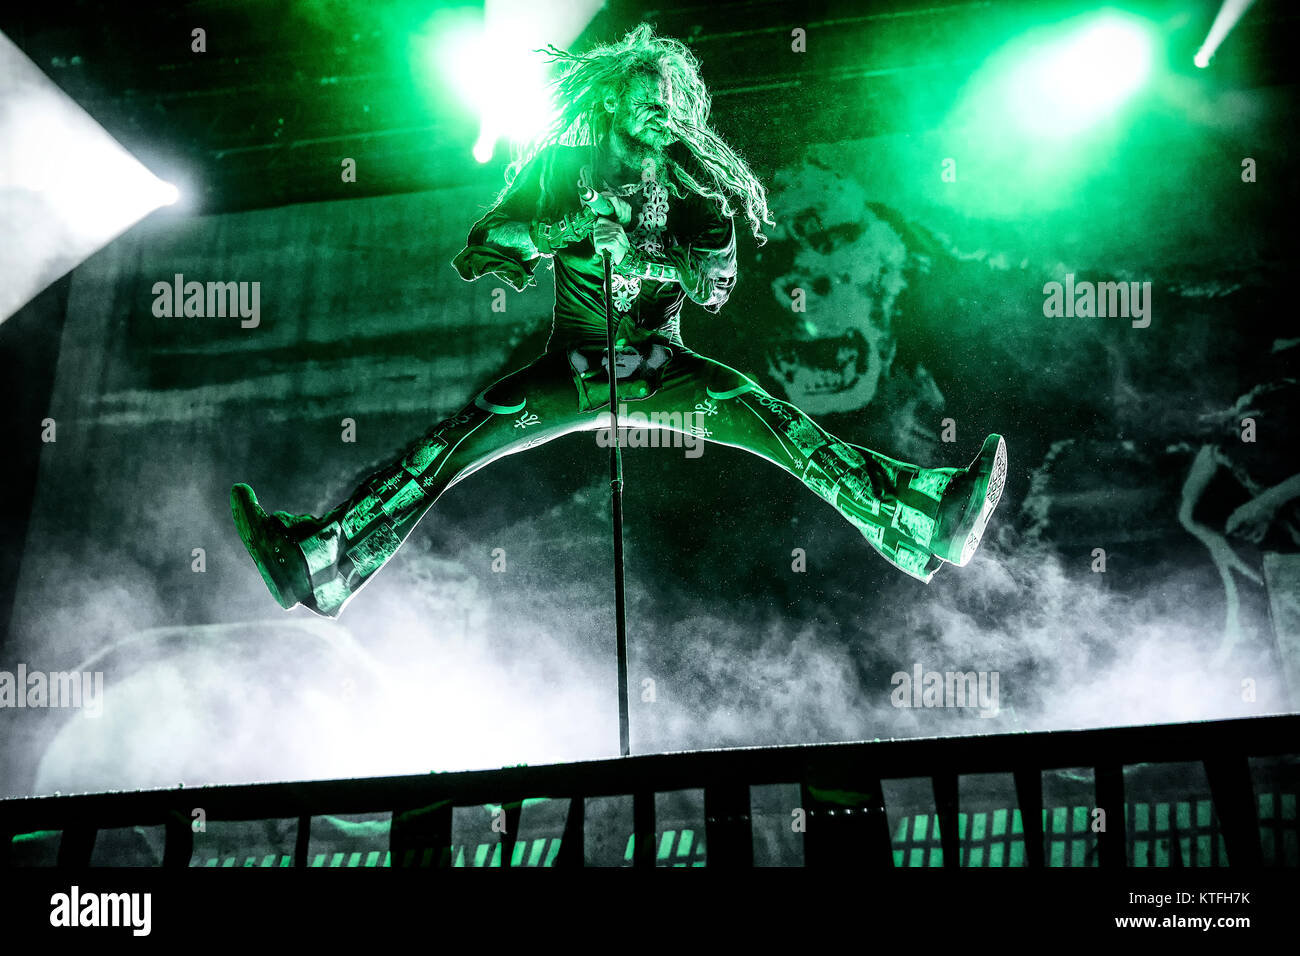 Norway, Halden – June 22, 2017. The American singer and musician Rob Zombie performs a live concert during the Norwegian music festival Tons of Rock 2017. Stock Photo